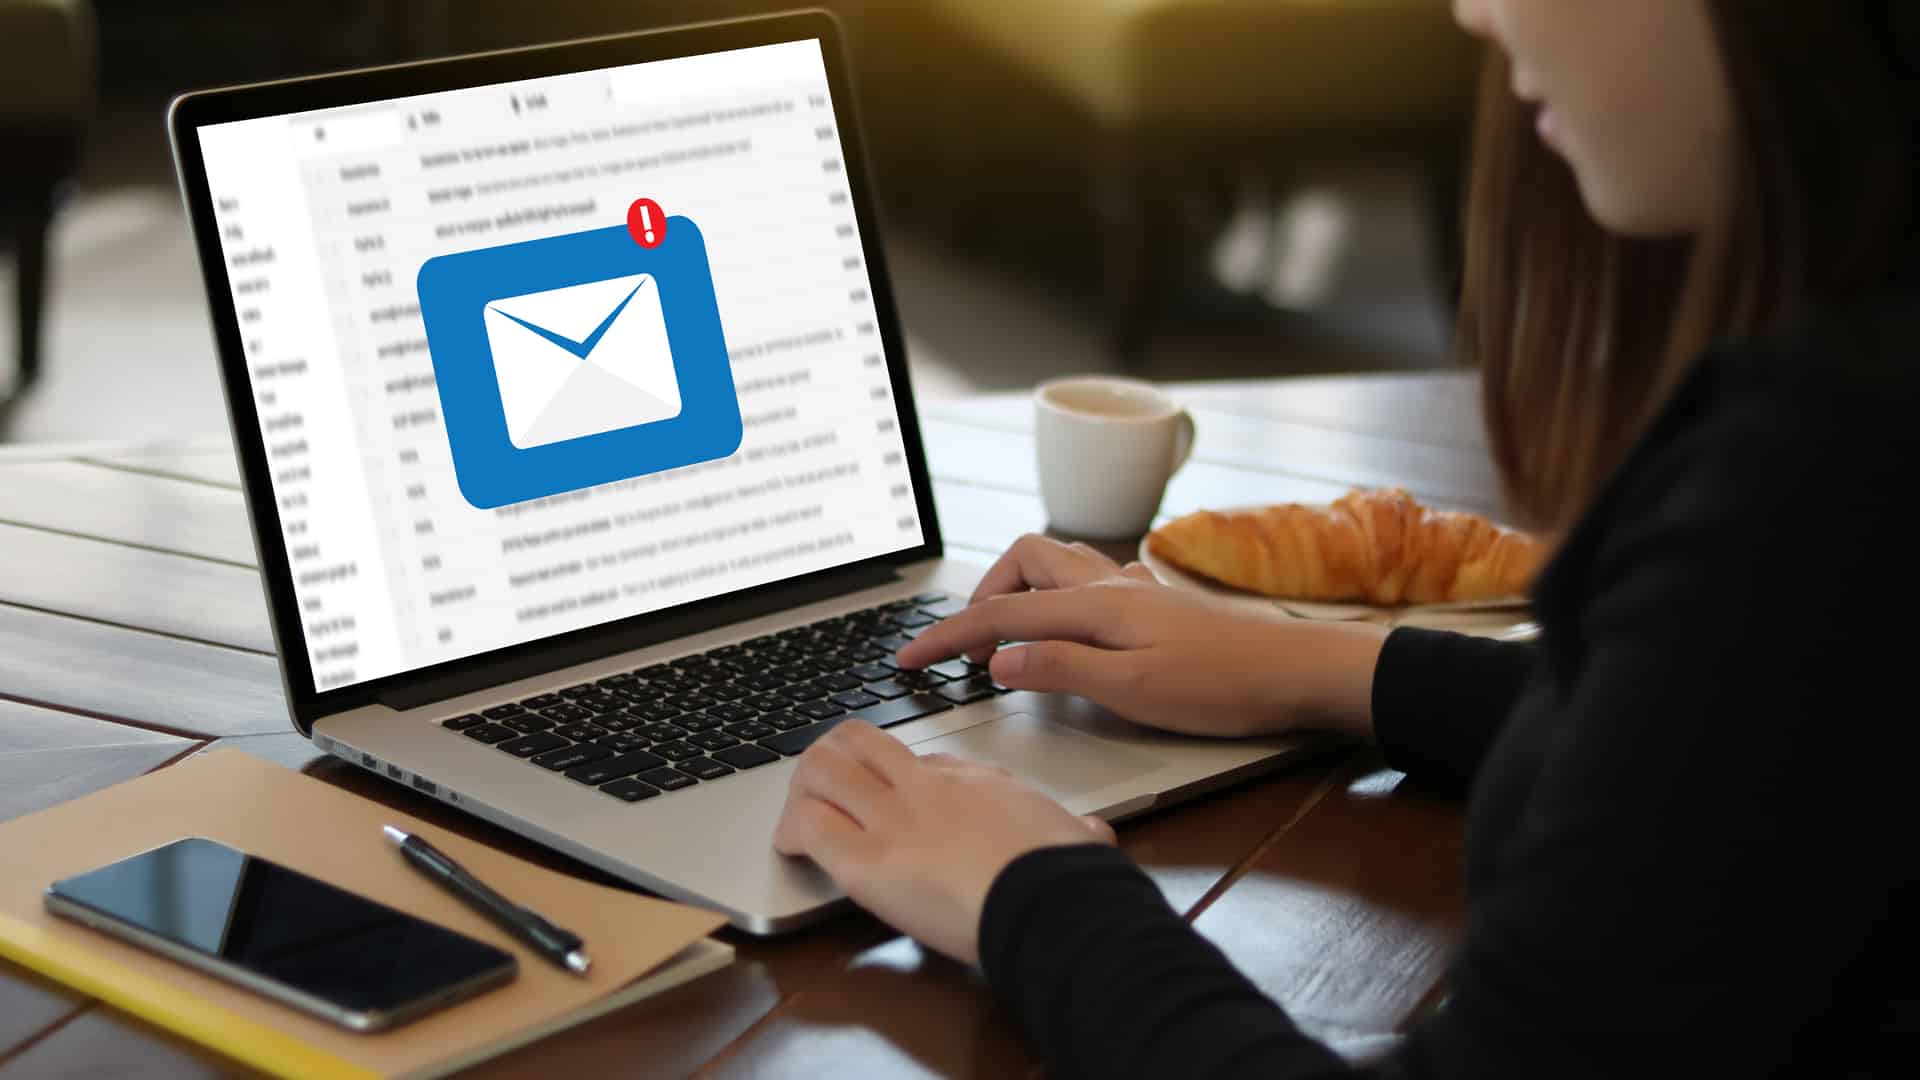 Email marketing will be a success story in 2022